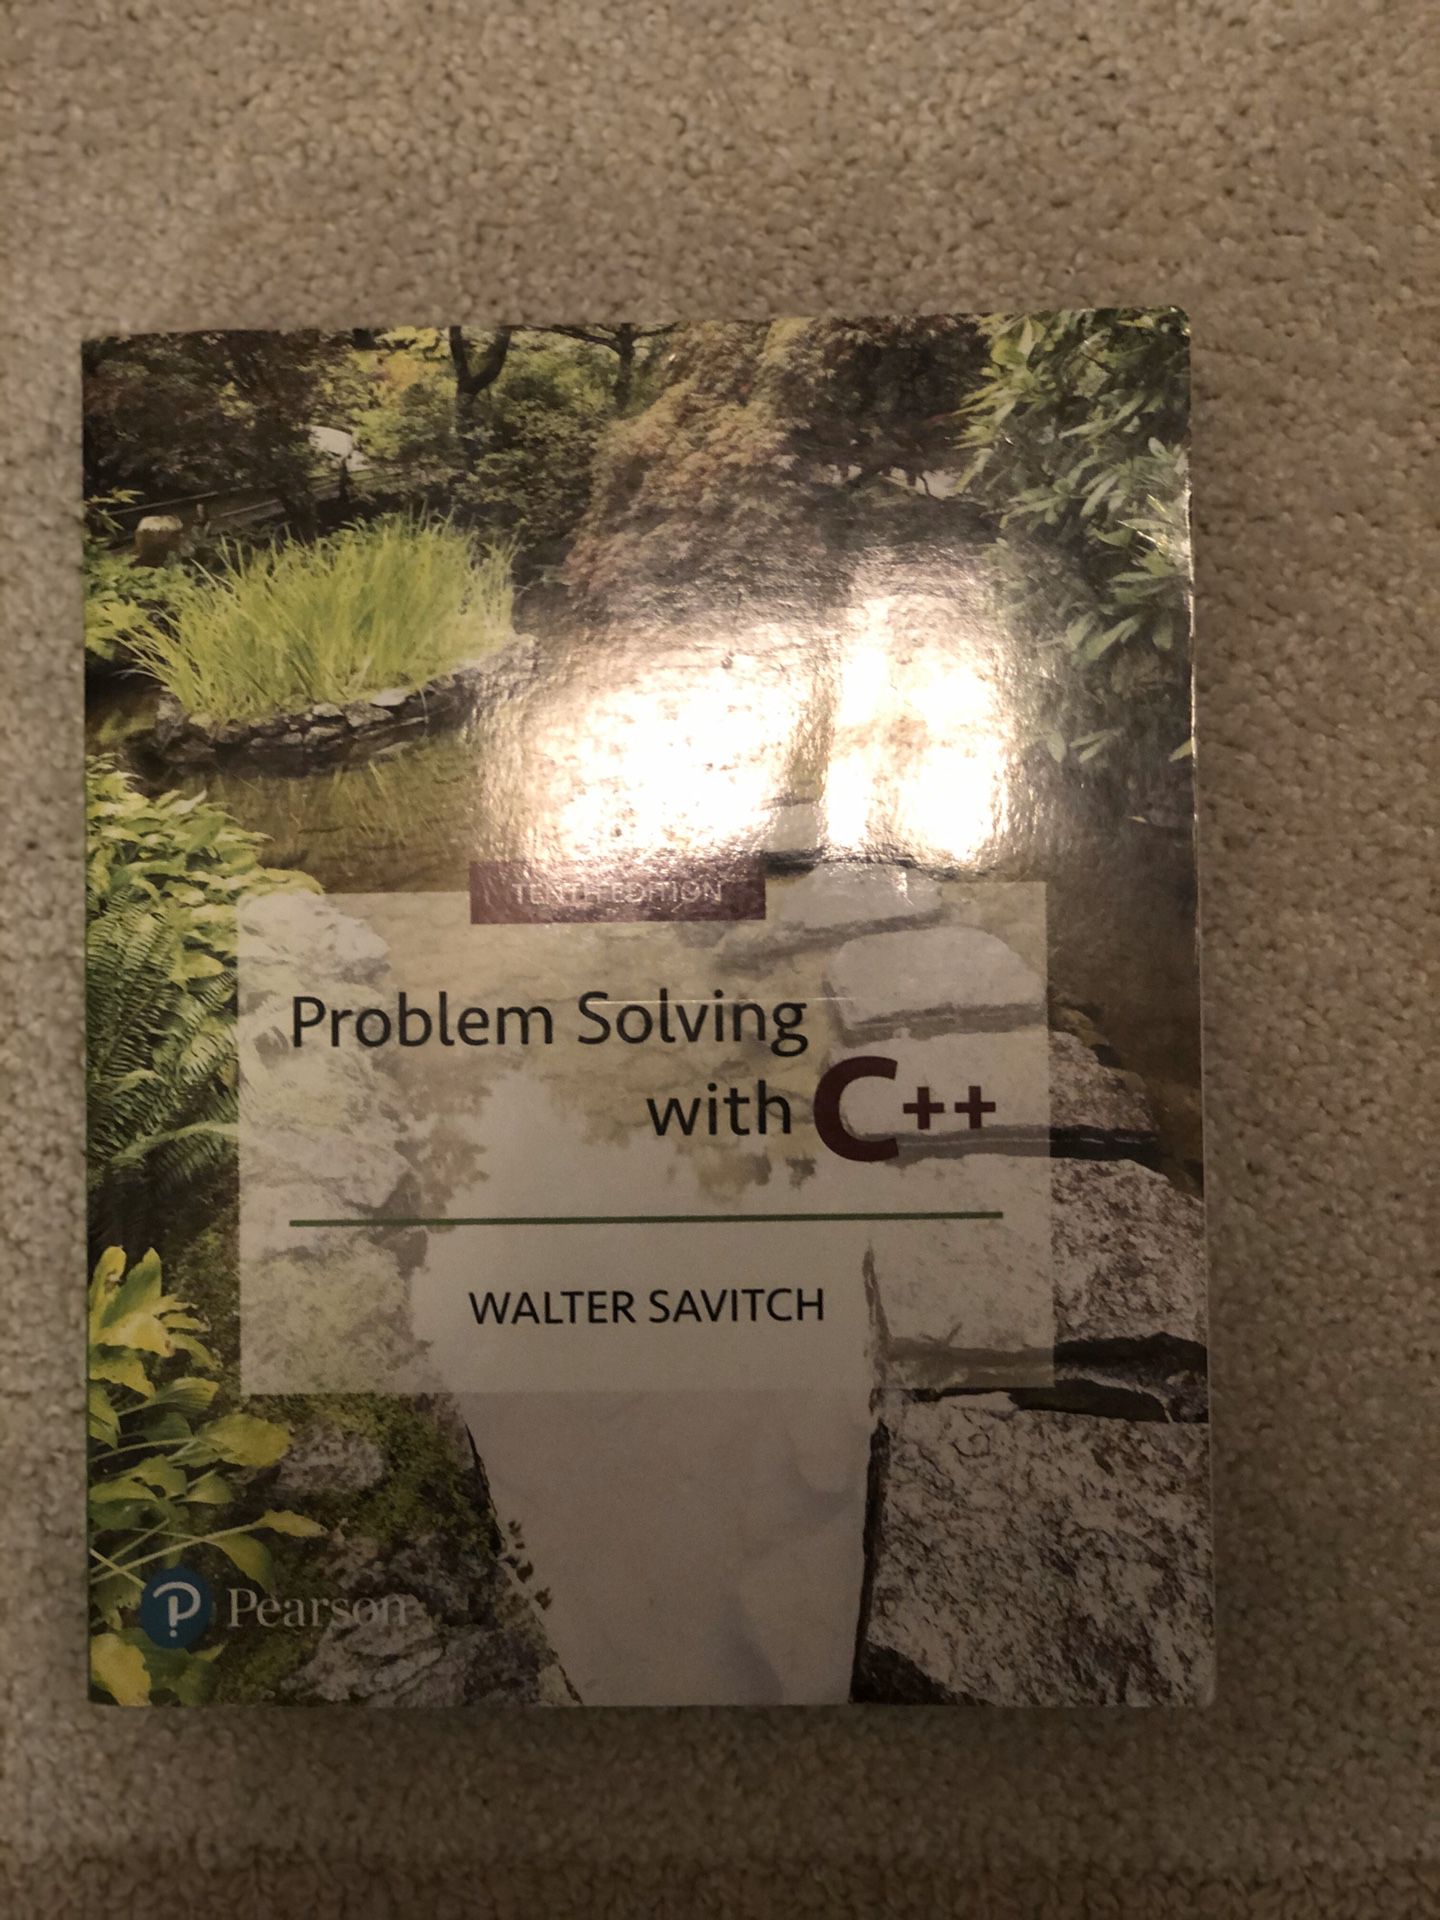 Problem Solving with C++ by Pearson